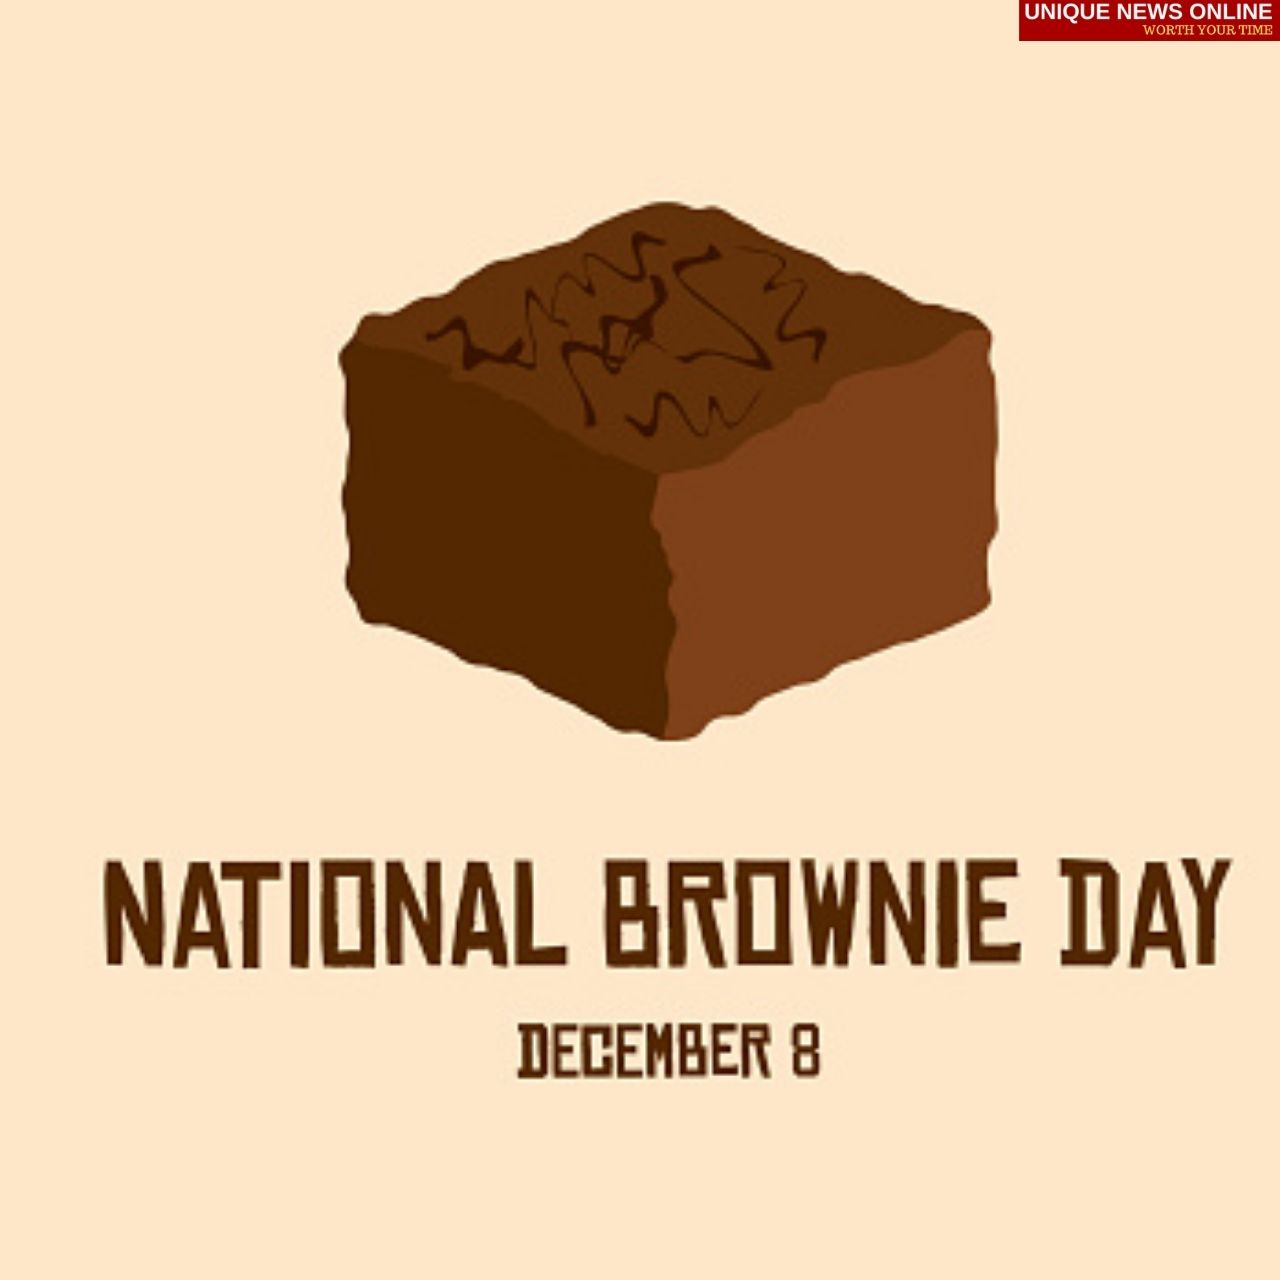 National Brownie Day 2021 Quotes, Images, Wishes, Sayings, Memes, and Greetings to share